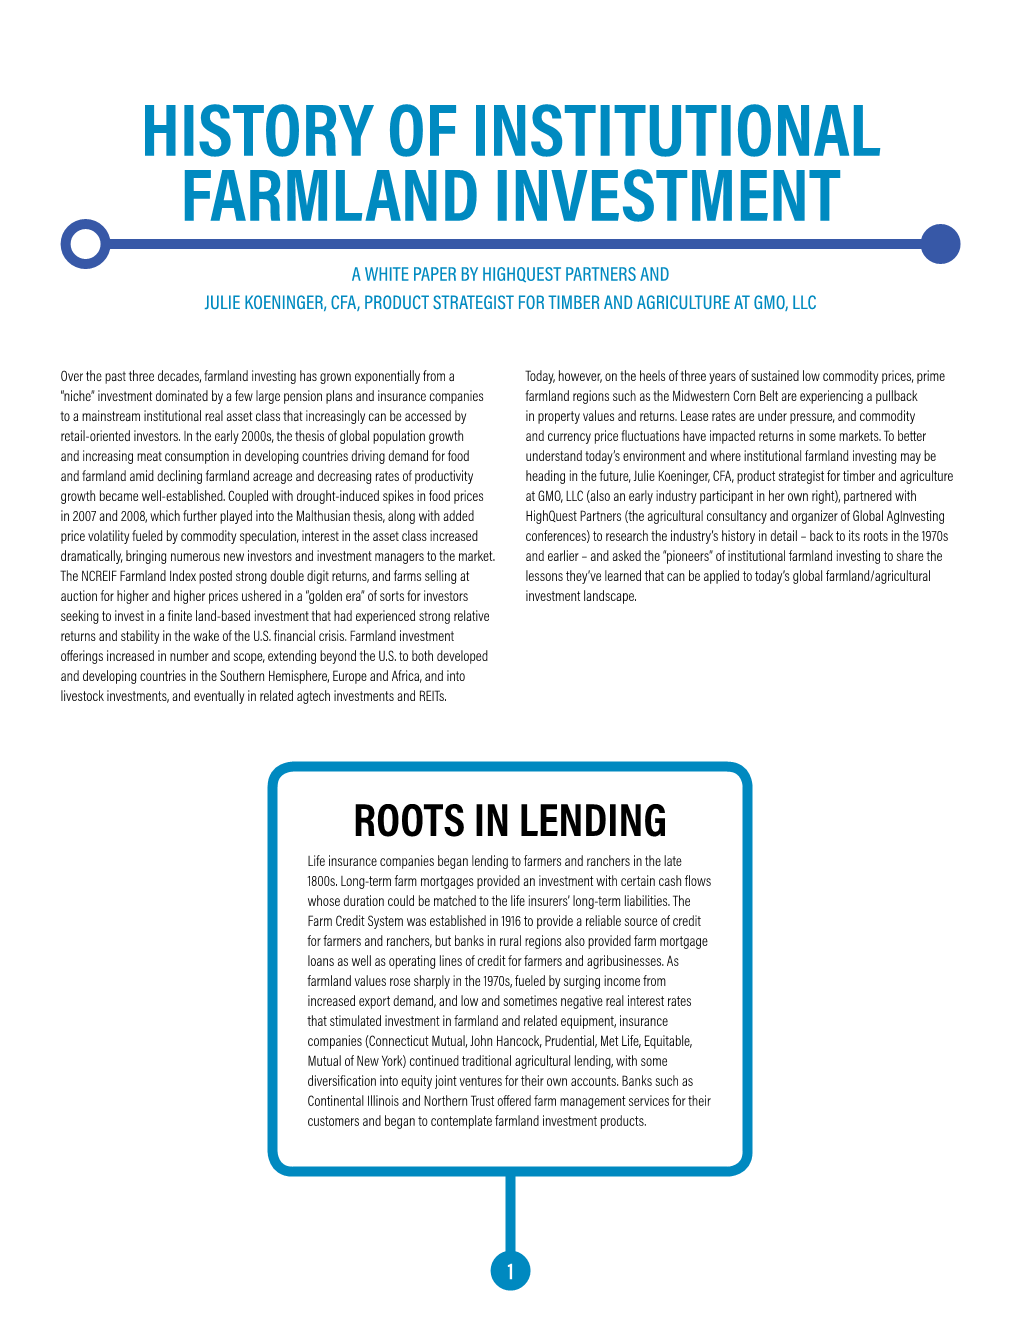 History of Institutional Farmland Investment